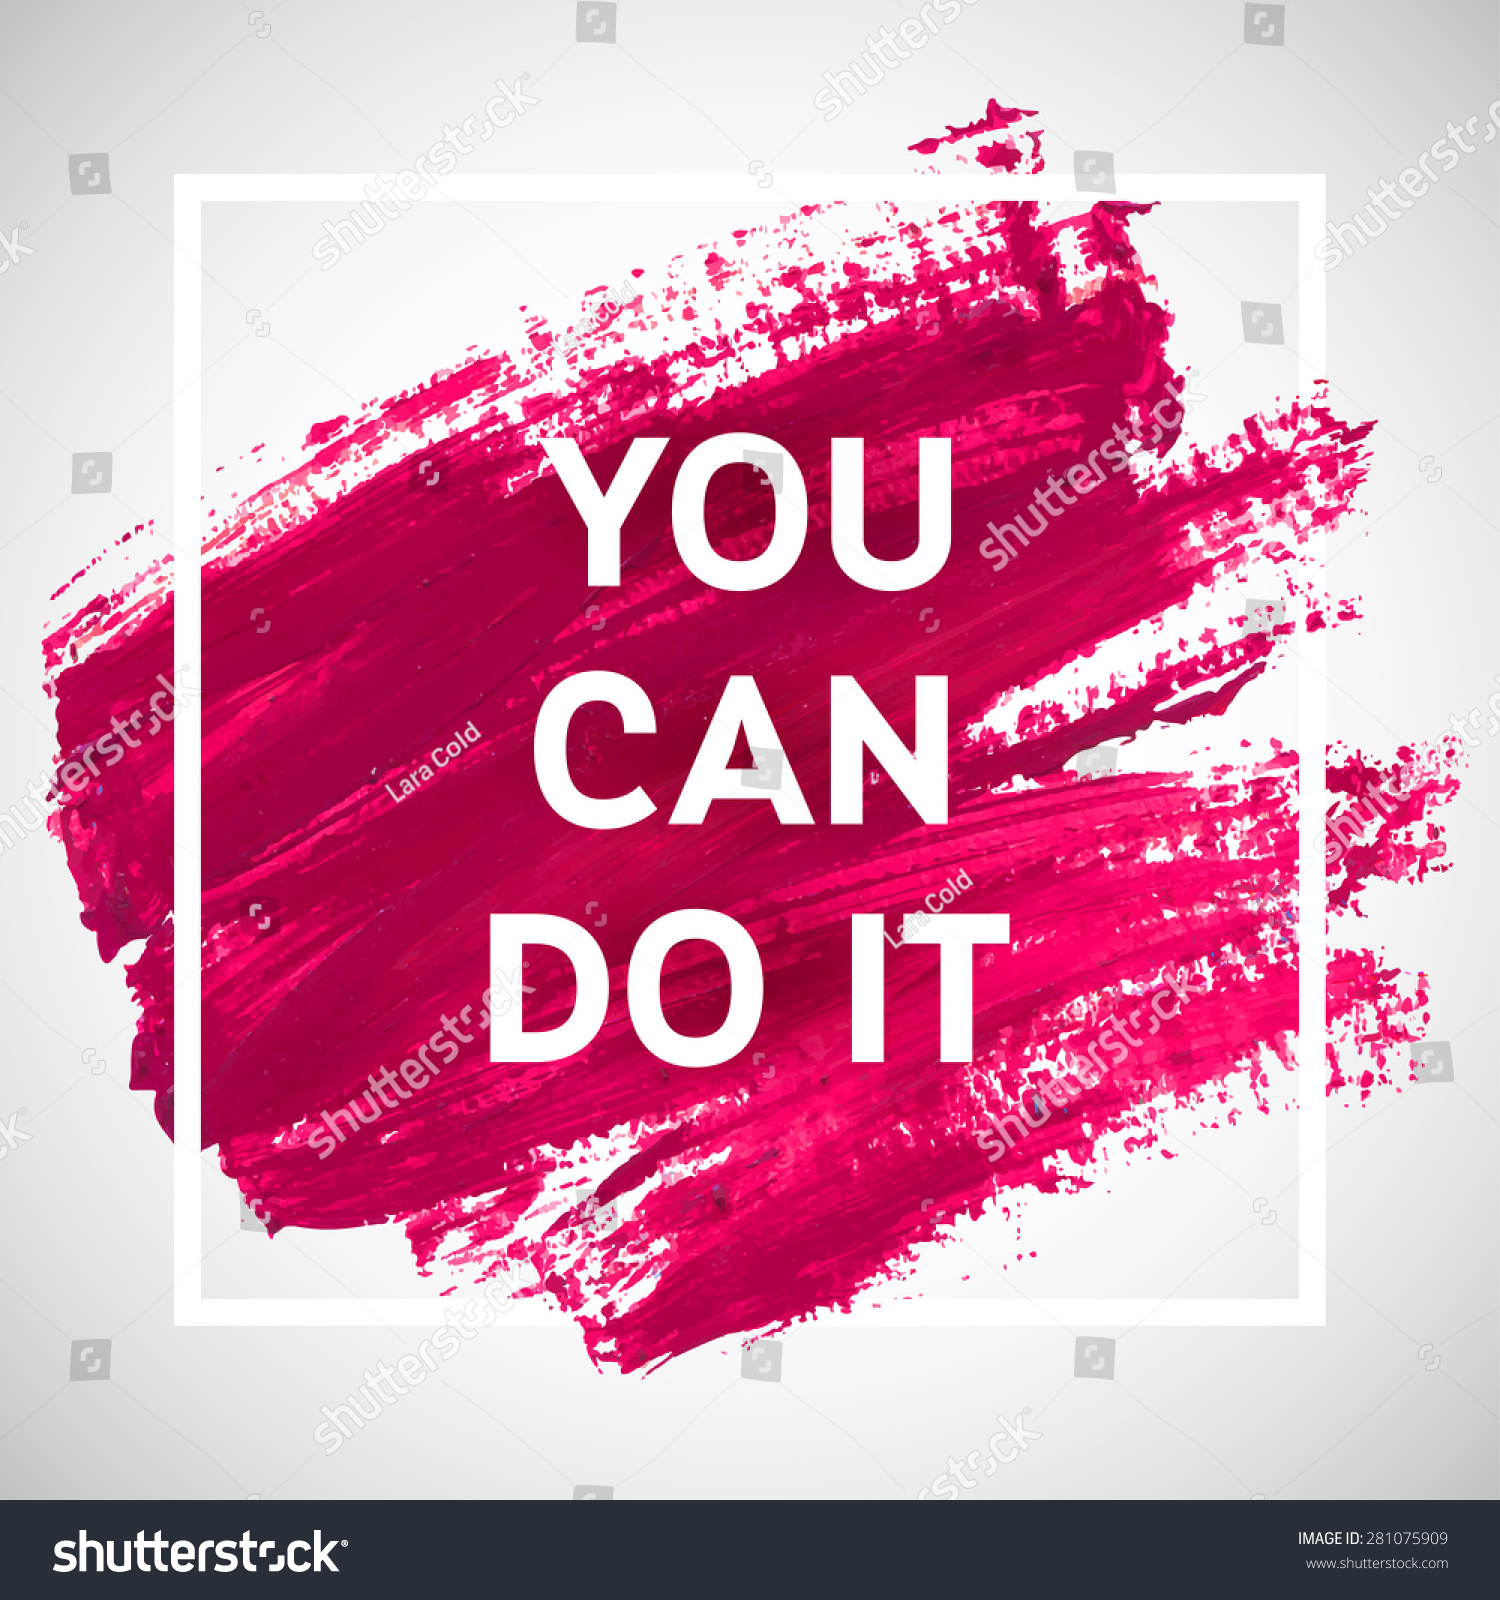 clipart you can do it - photo #31